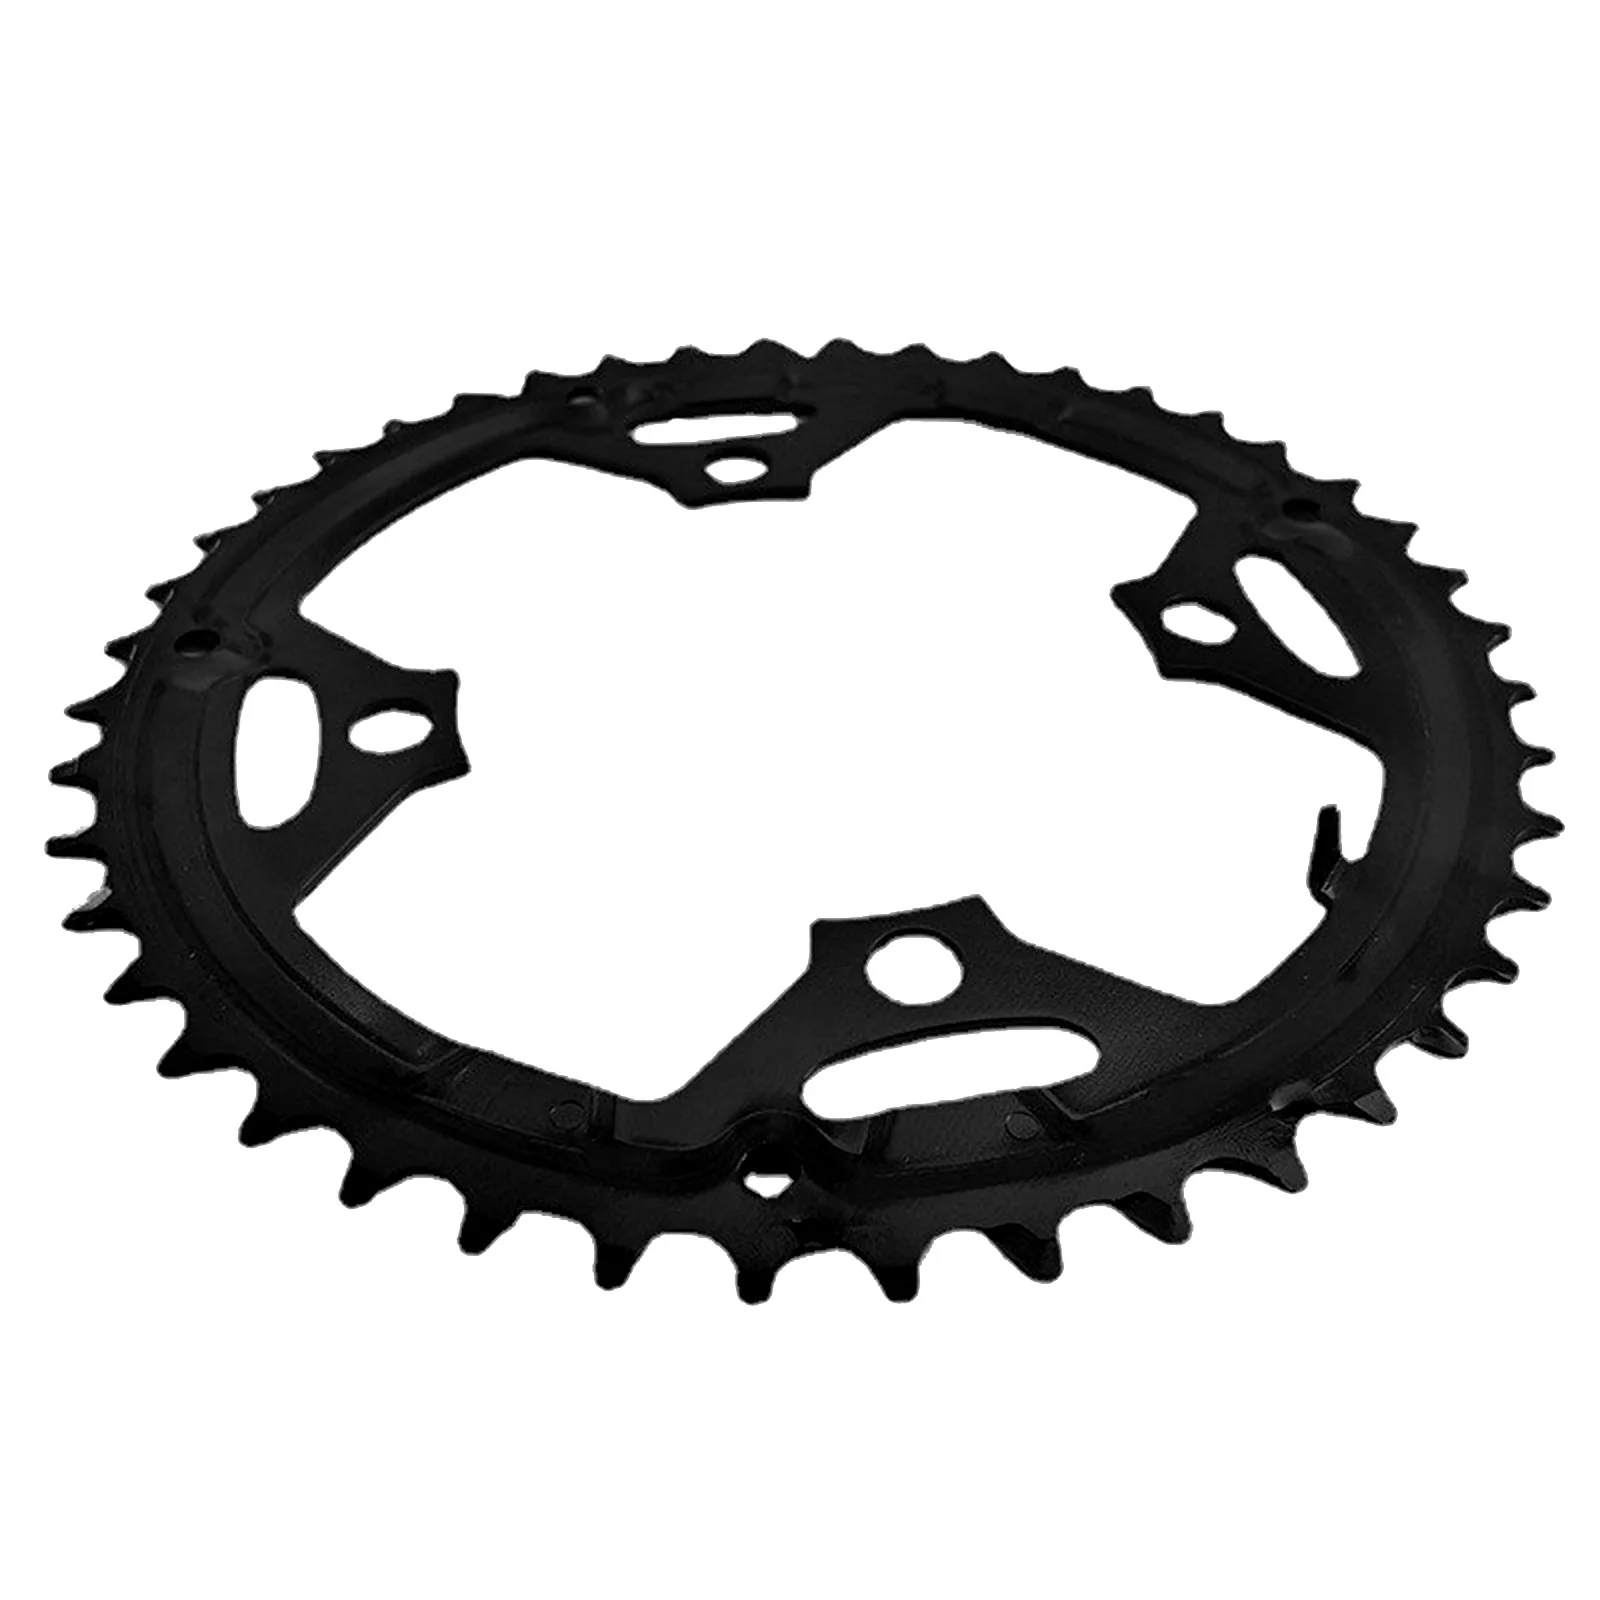 Circle 44T Bike Chain Ring BCD 104mm Chainwheel Crankset Sprocket 7/8/9 Speed for Replace Accessories Folding Road MTB Bicycle